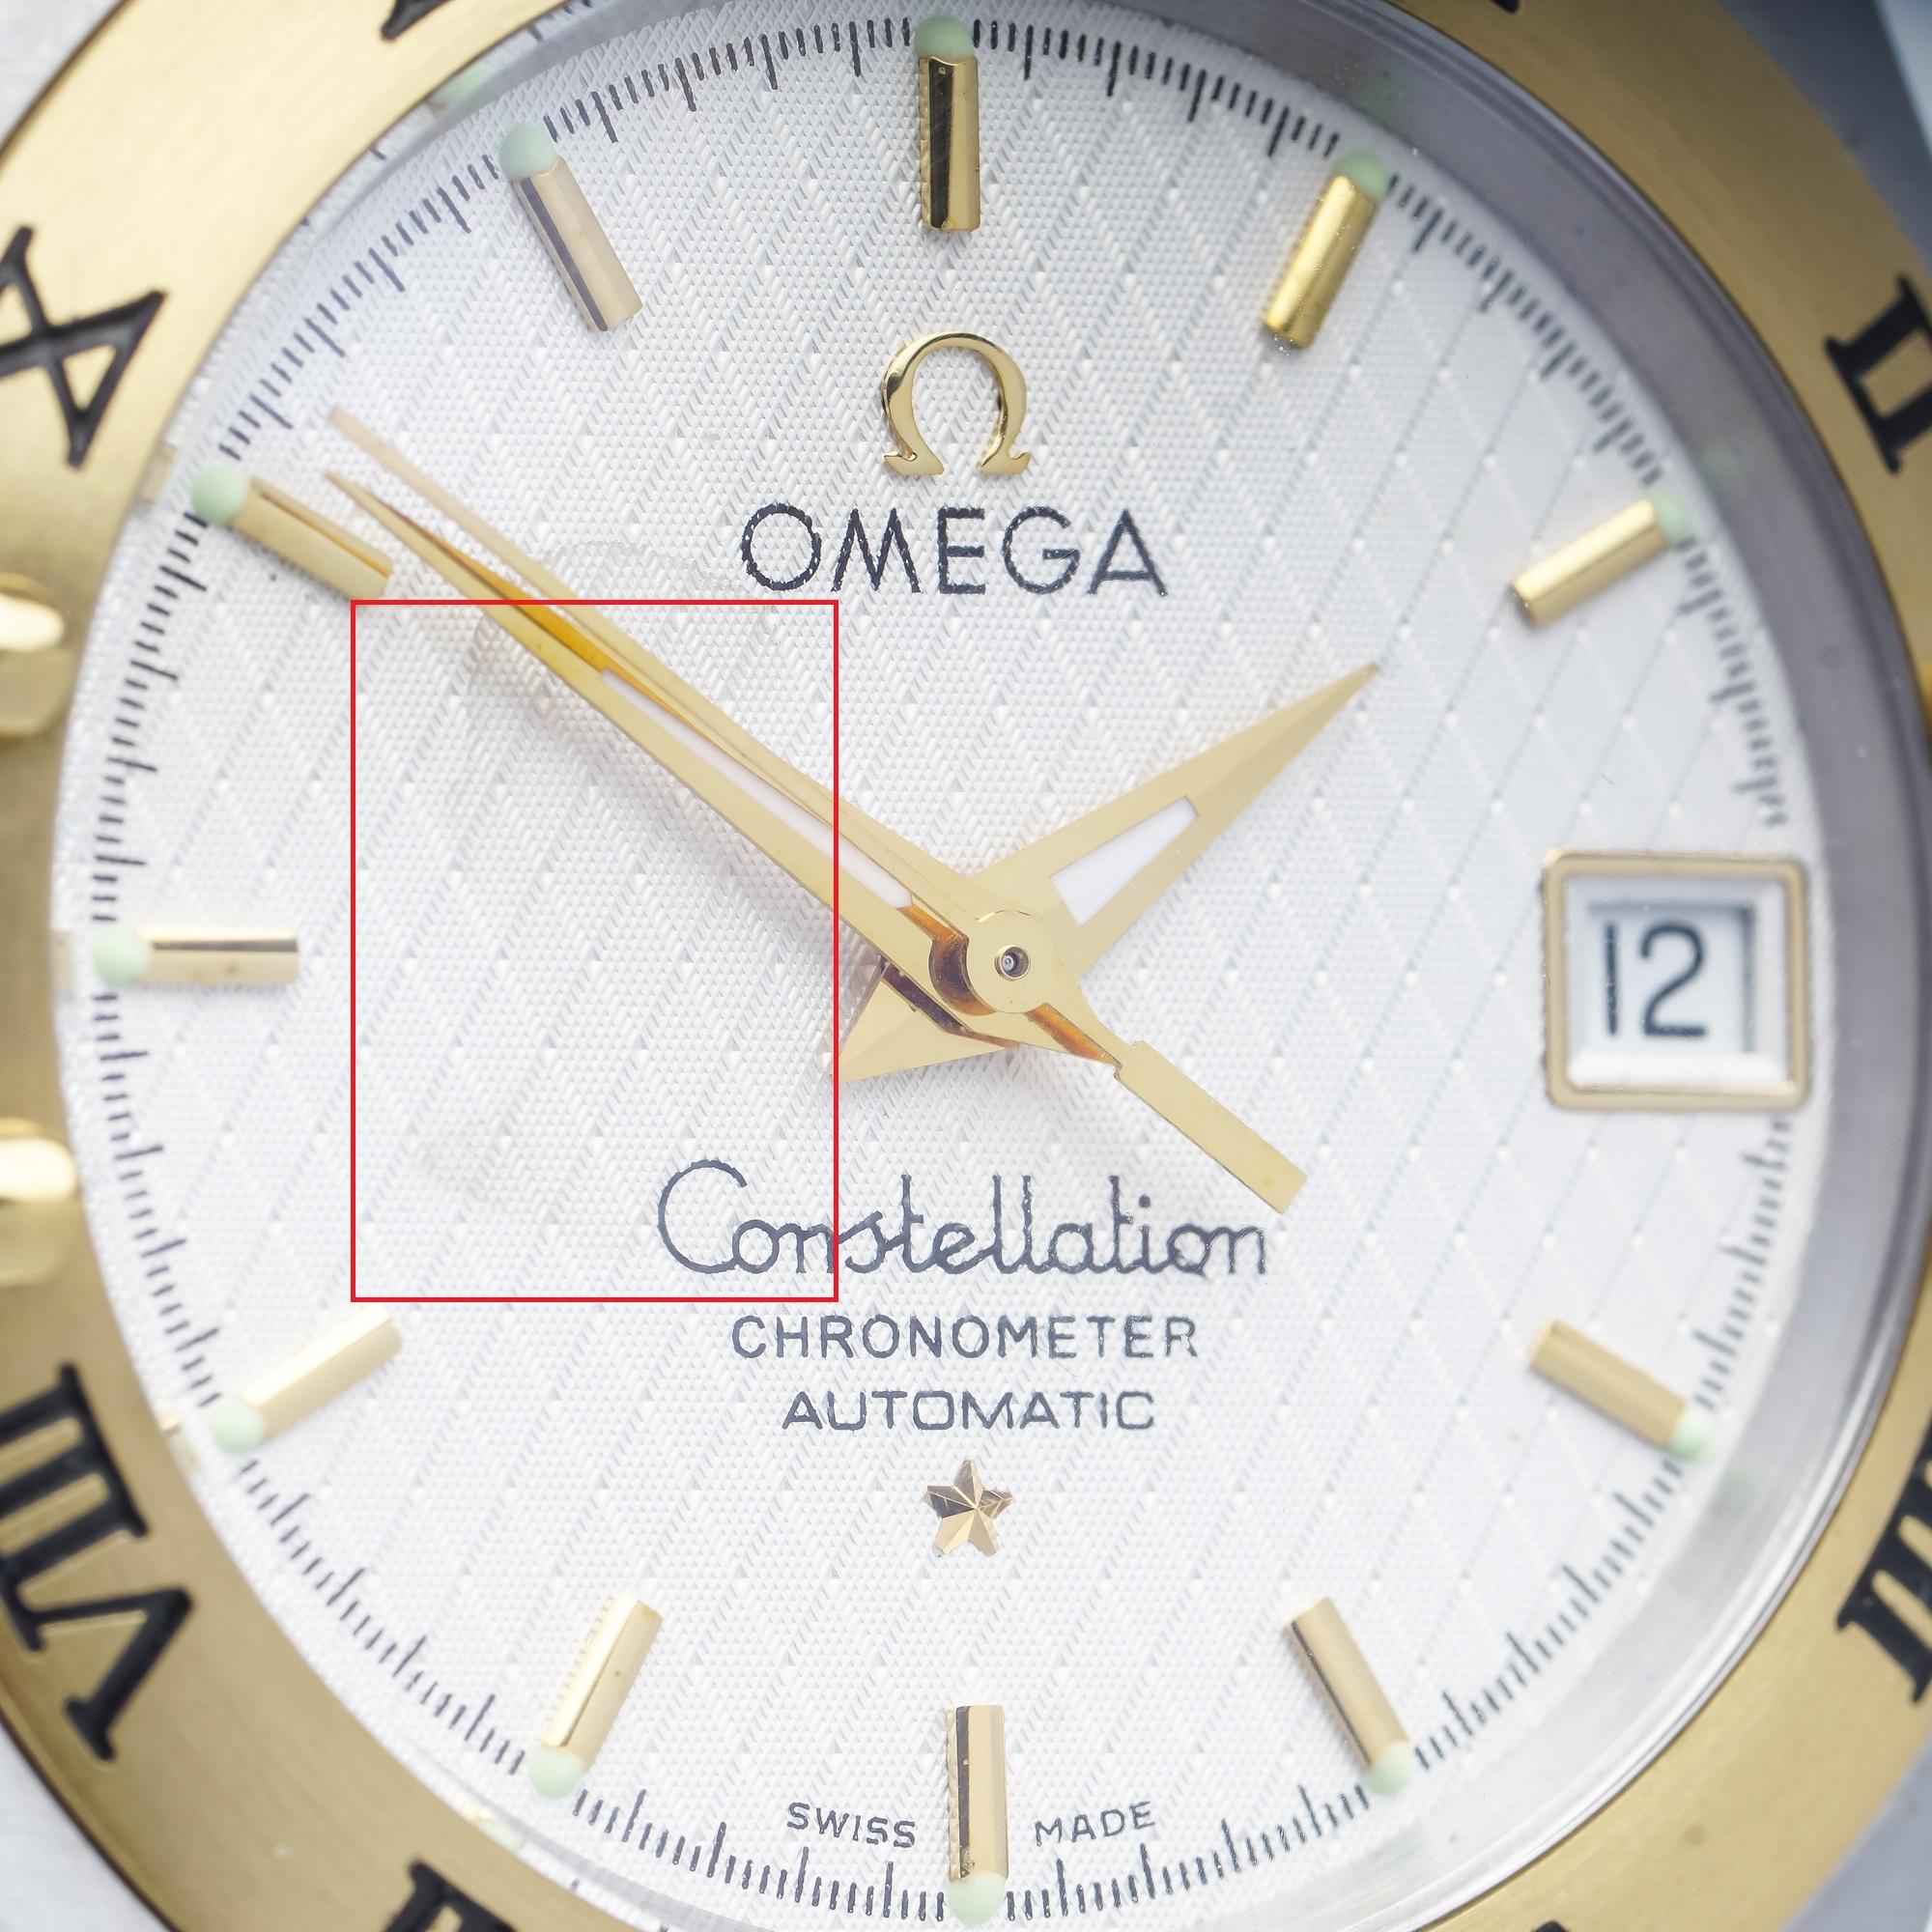 Omega Constellation: 18kt. yellow gold and stainless steel Bi - colour men's wristwatch. 

Made in Switzerland, Circa 1990's 
Case Diameter: 36 mm
Movement: Mechanical Automatic 
Case Material: Stainless Steel & 18kt. gold 
Watchband Material: